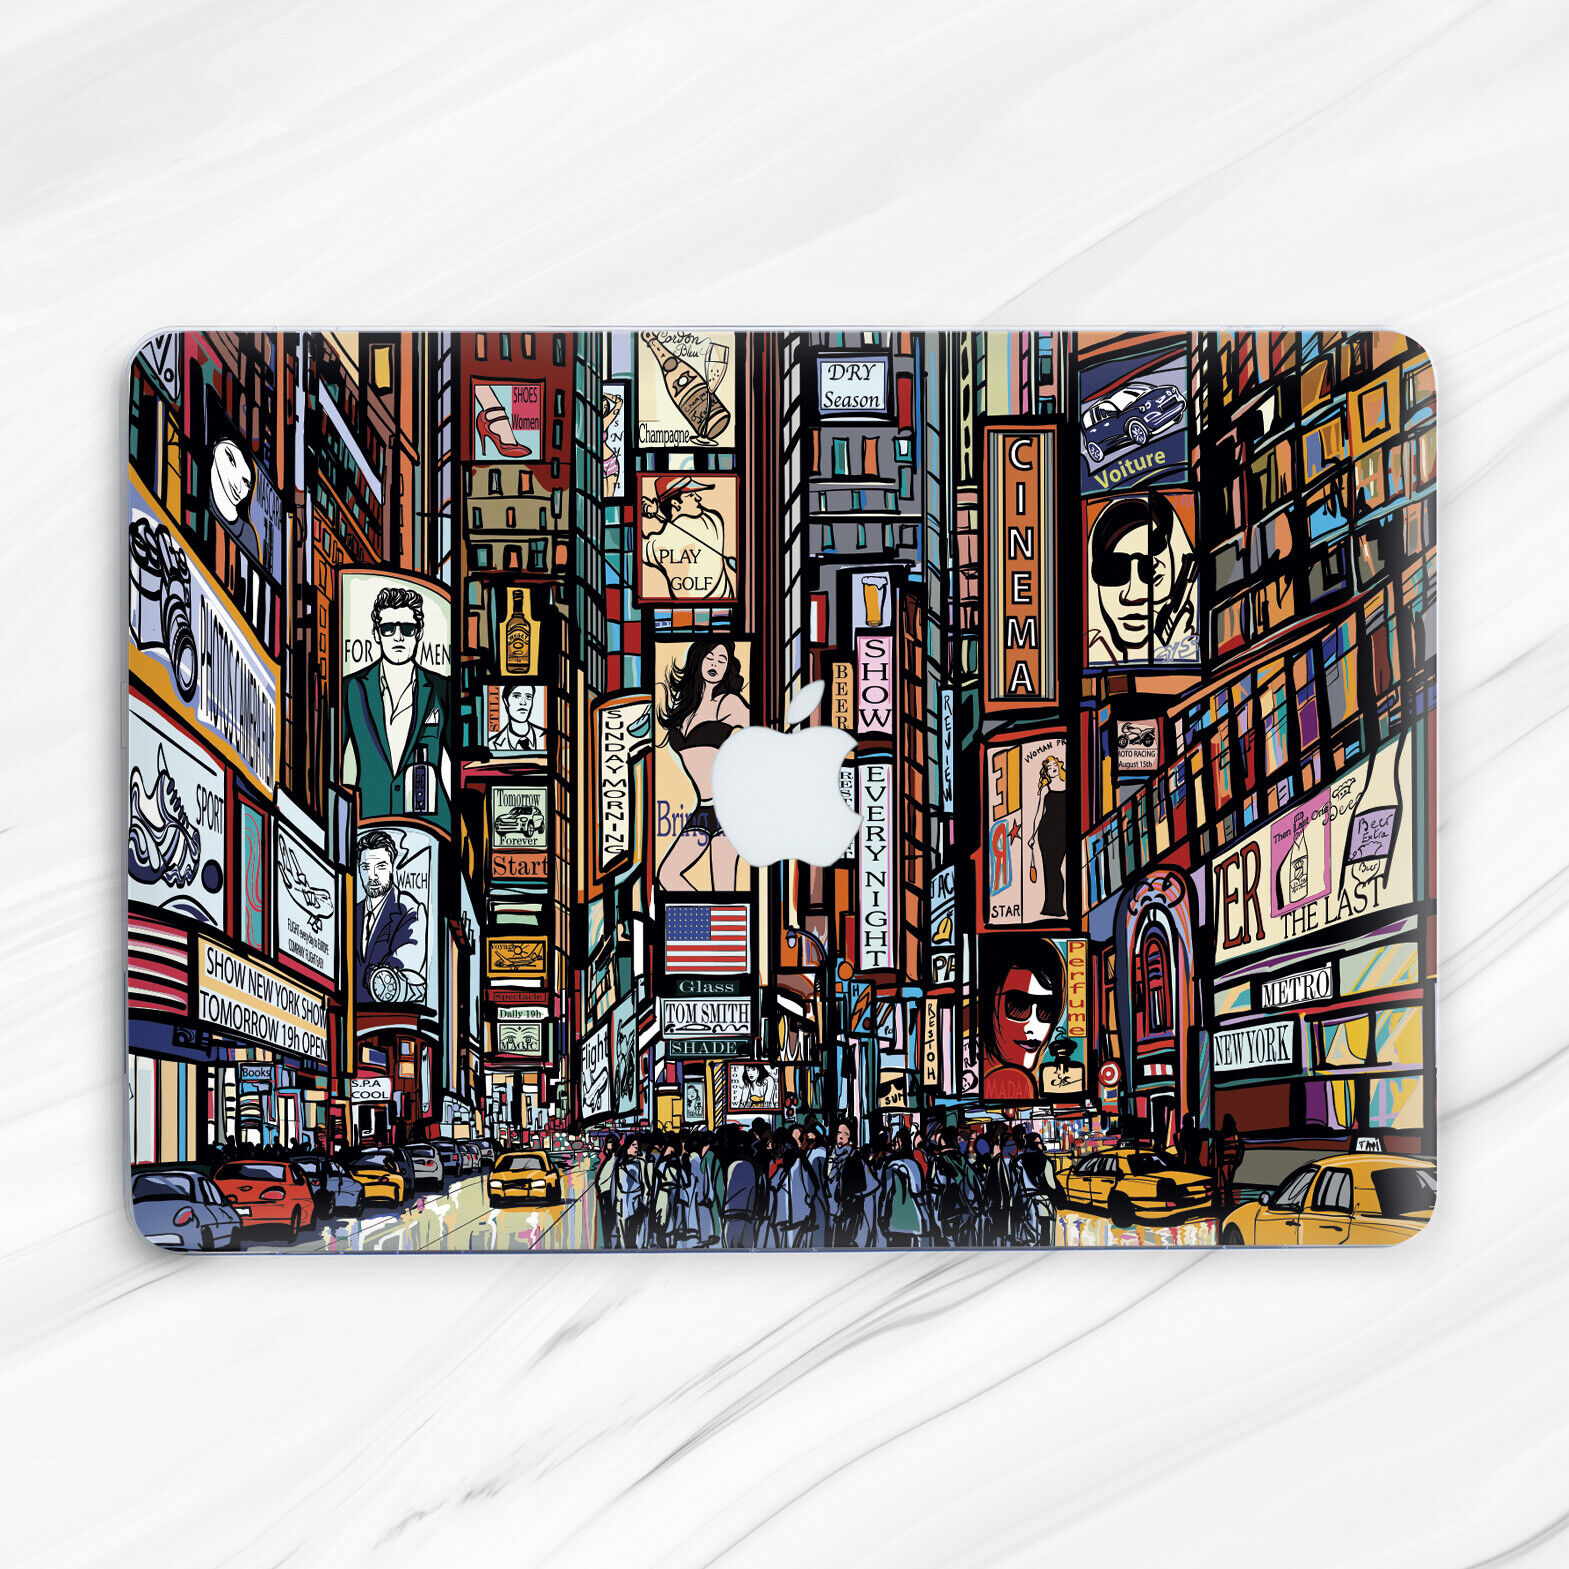 New York Time Square Art Hard Case Cover For Macbook Air 11 13 Pro 13 14 15 16